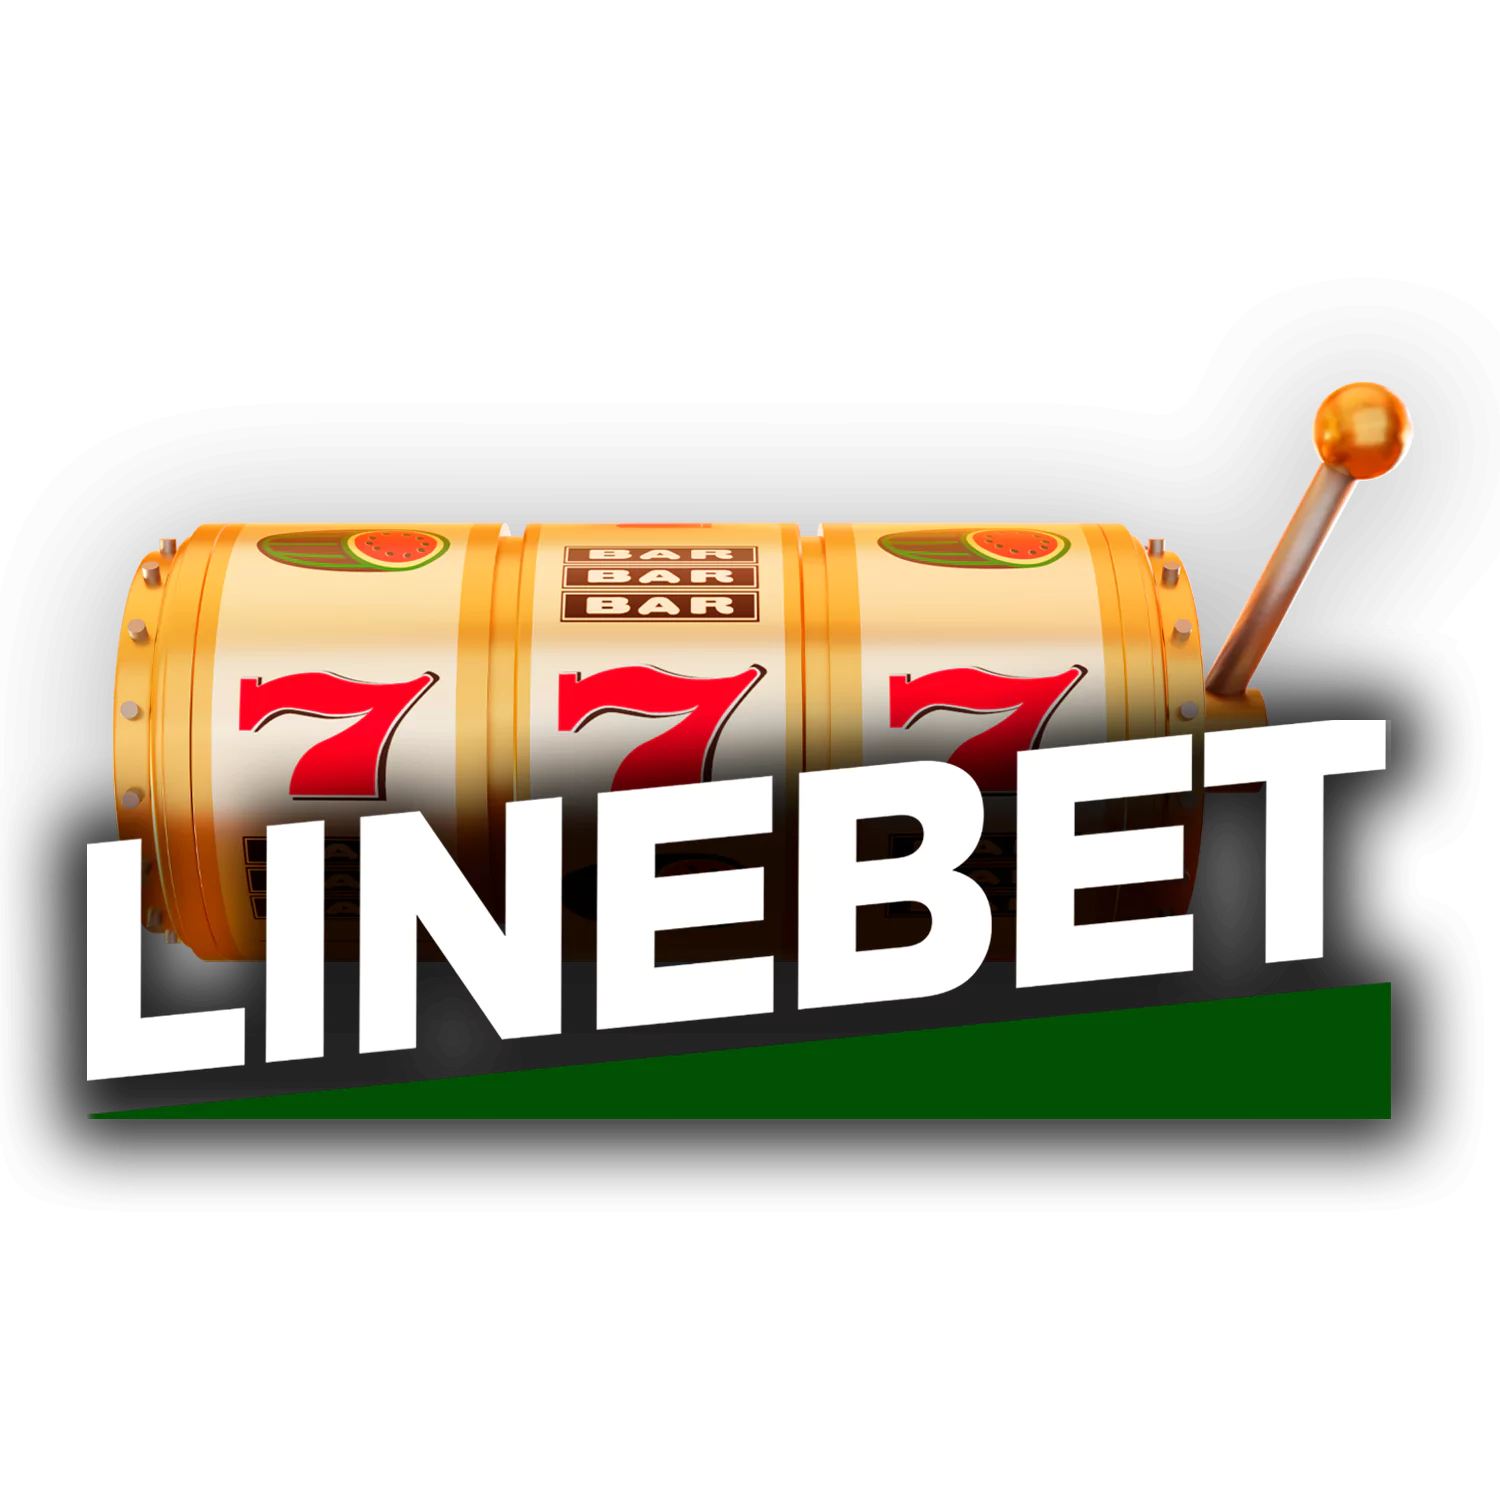 Linebet supports online casino.